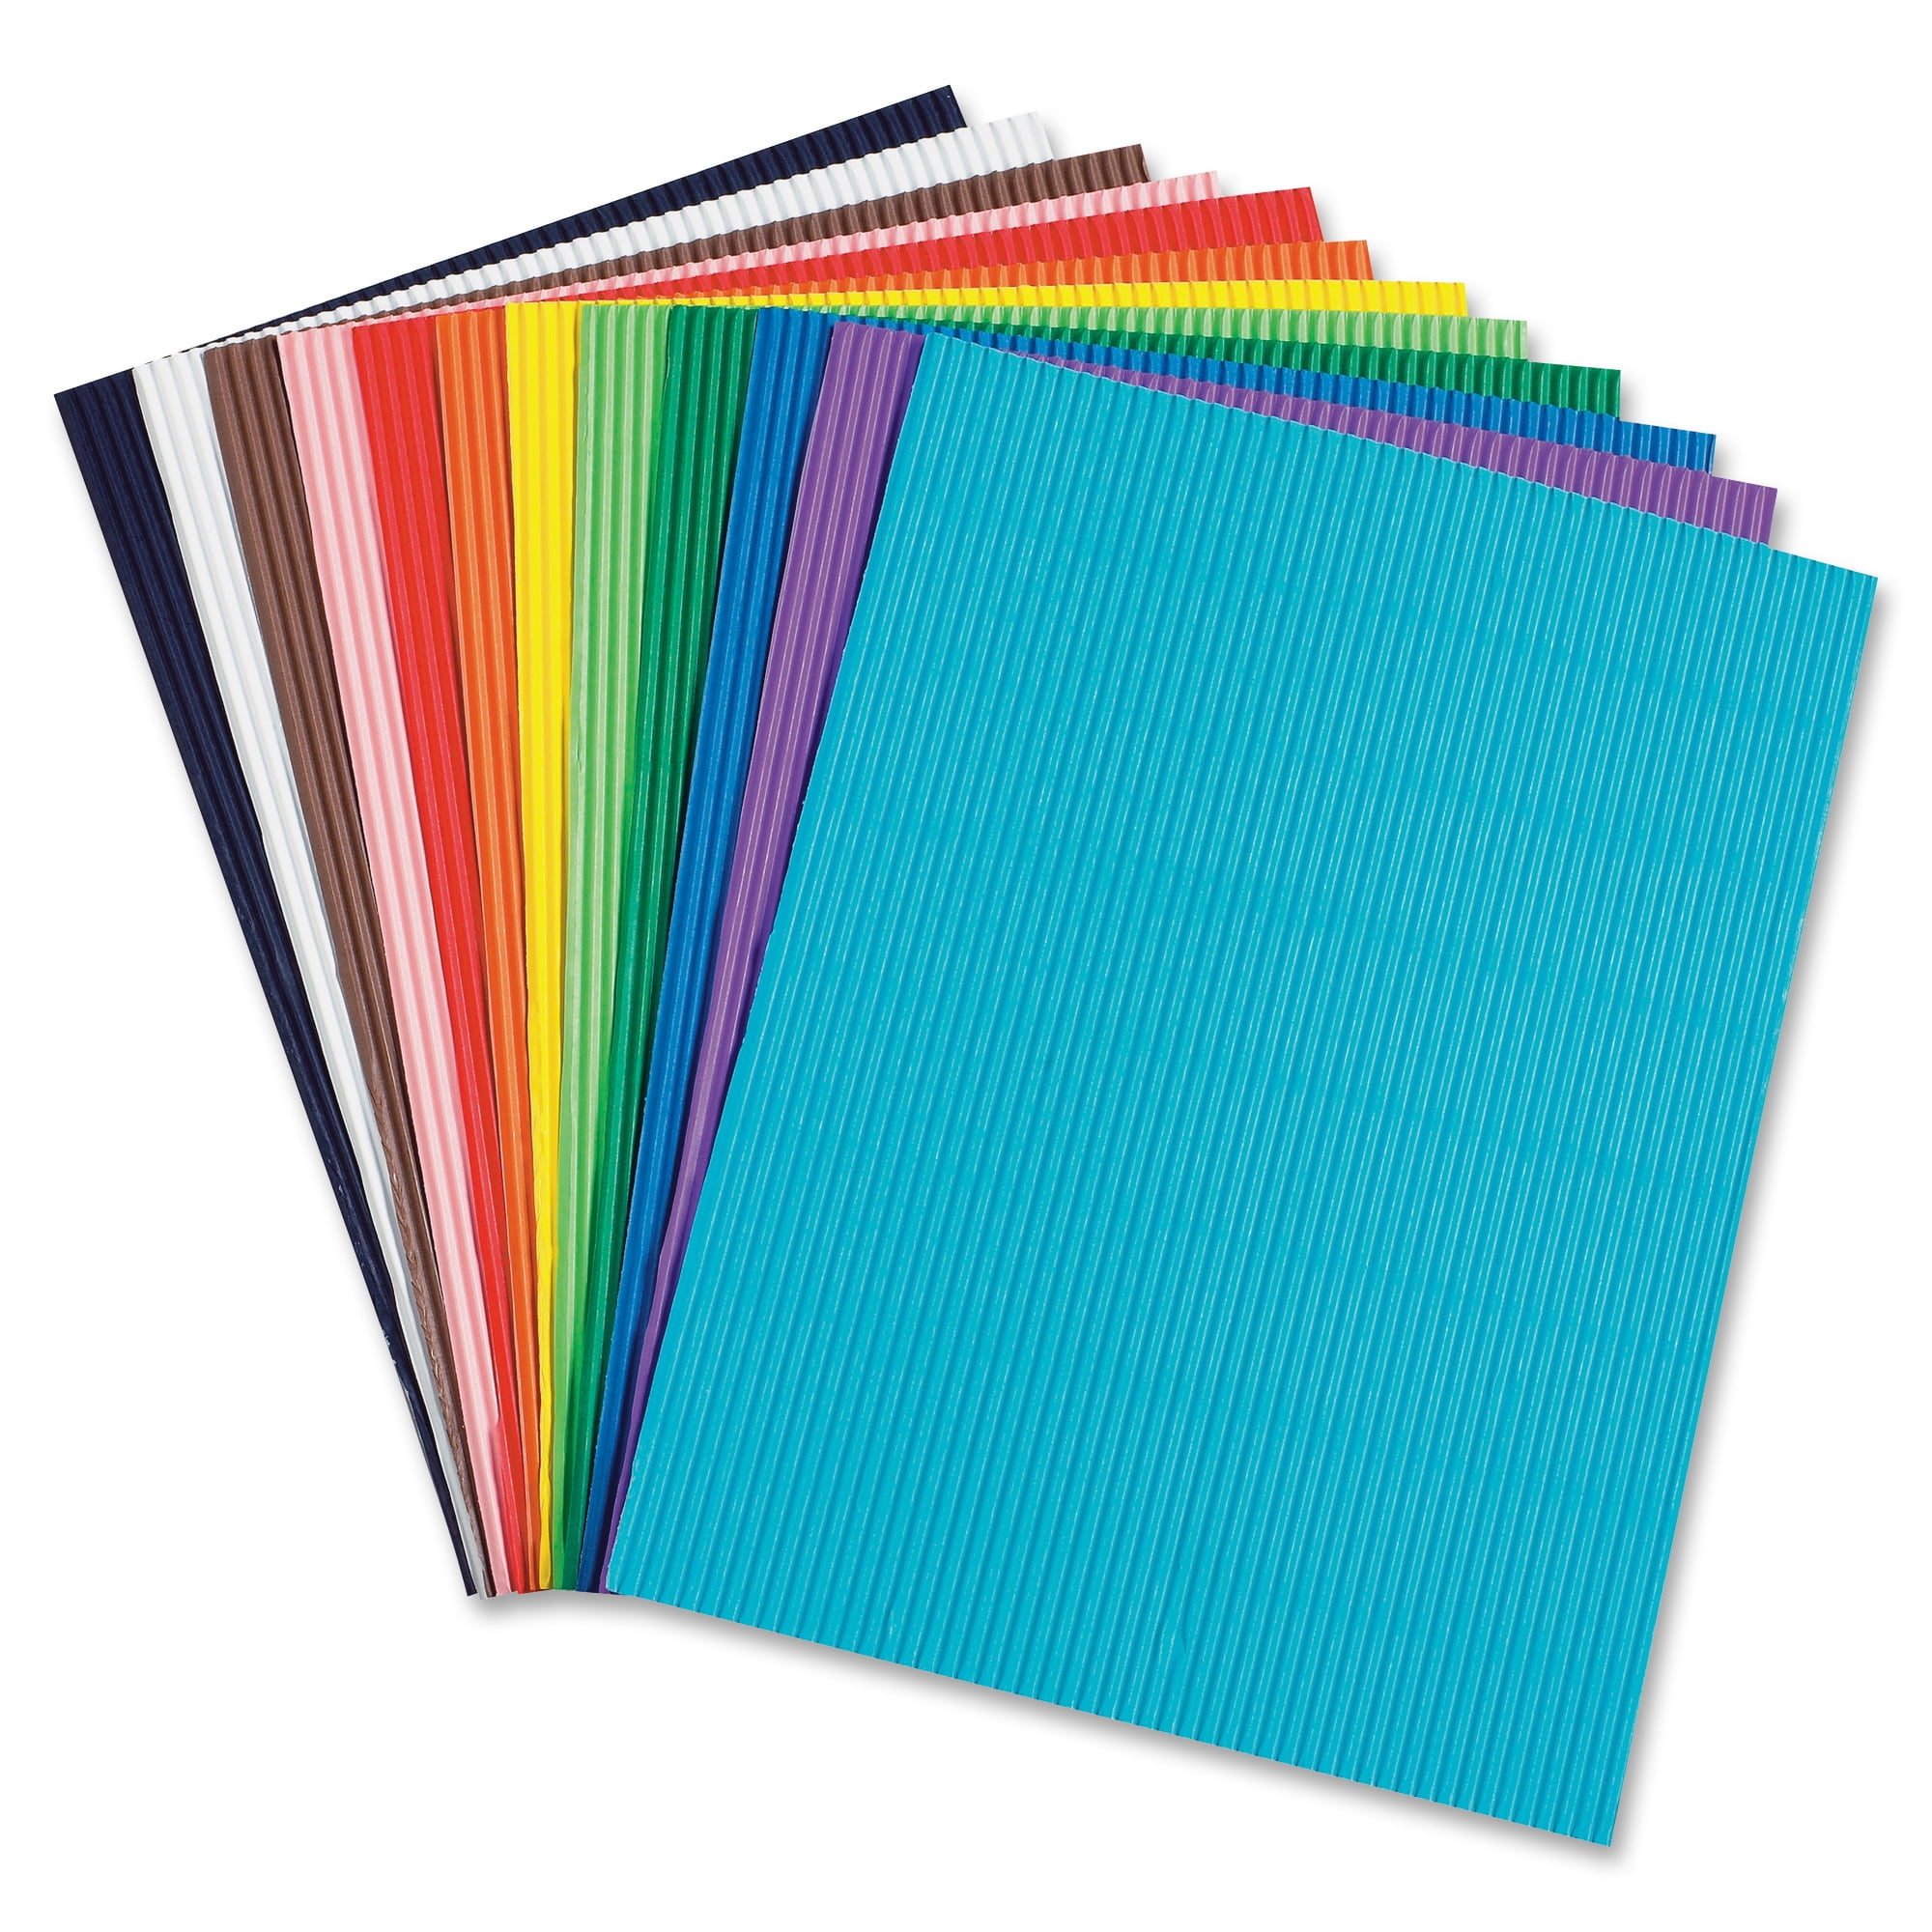 Corobuff Corrugated Paper Assorted Bright Color Pack of 12 School Specialty 006321 12 Sheets 12 X 16 in